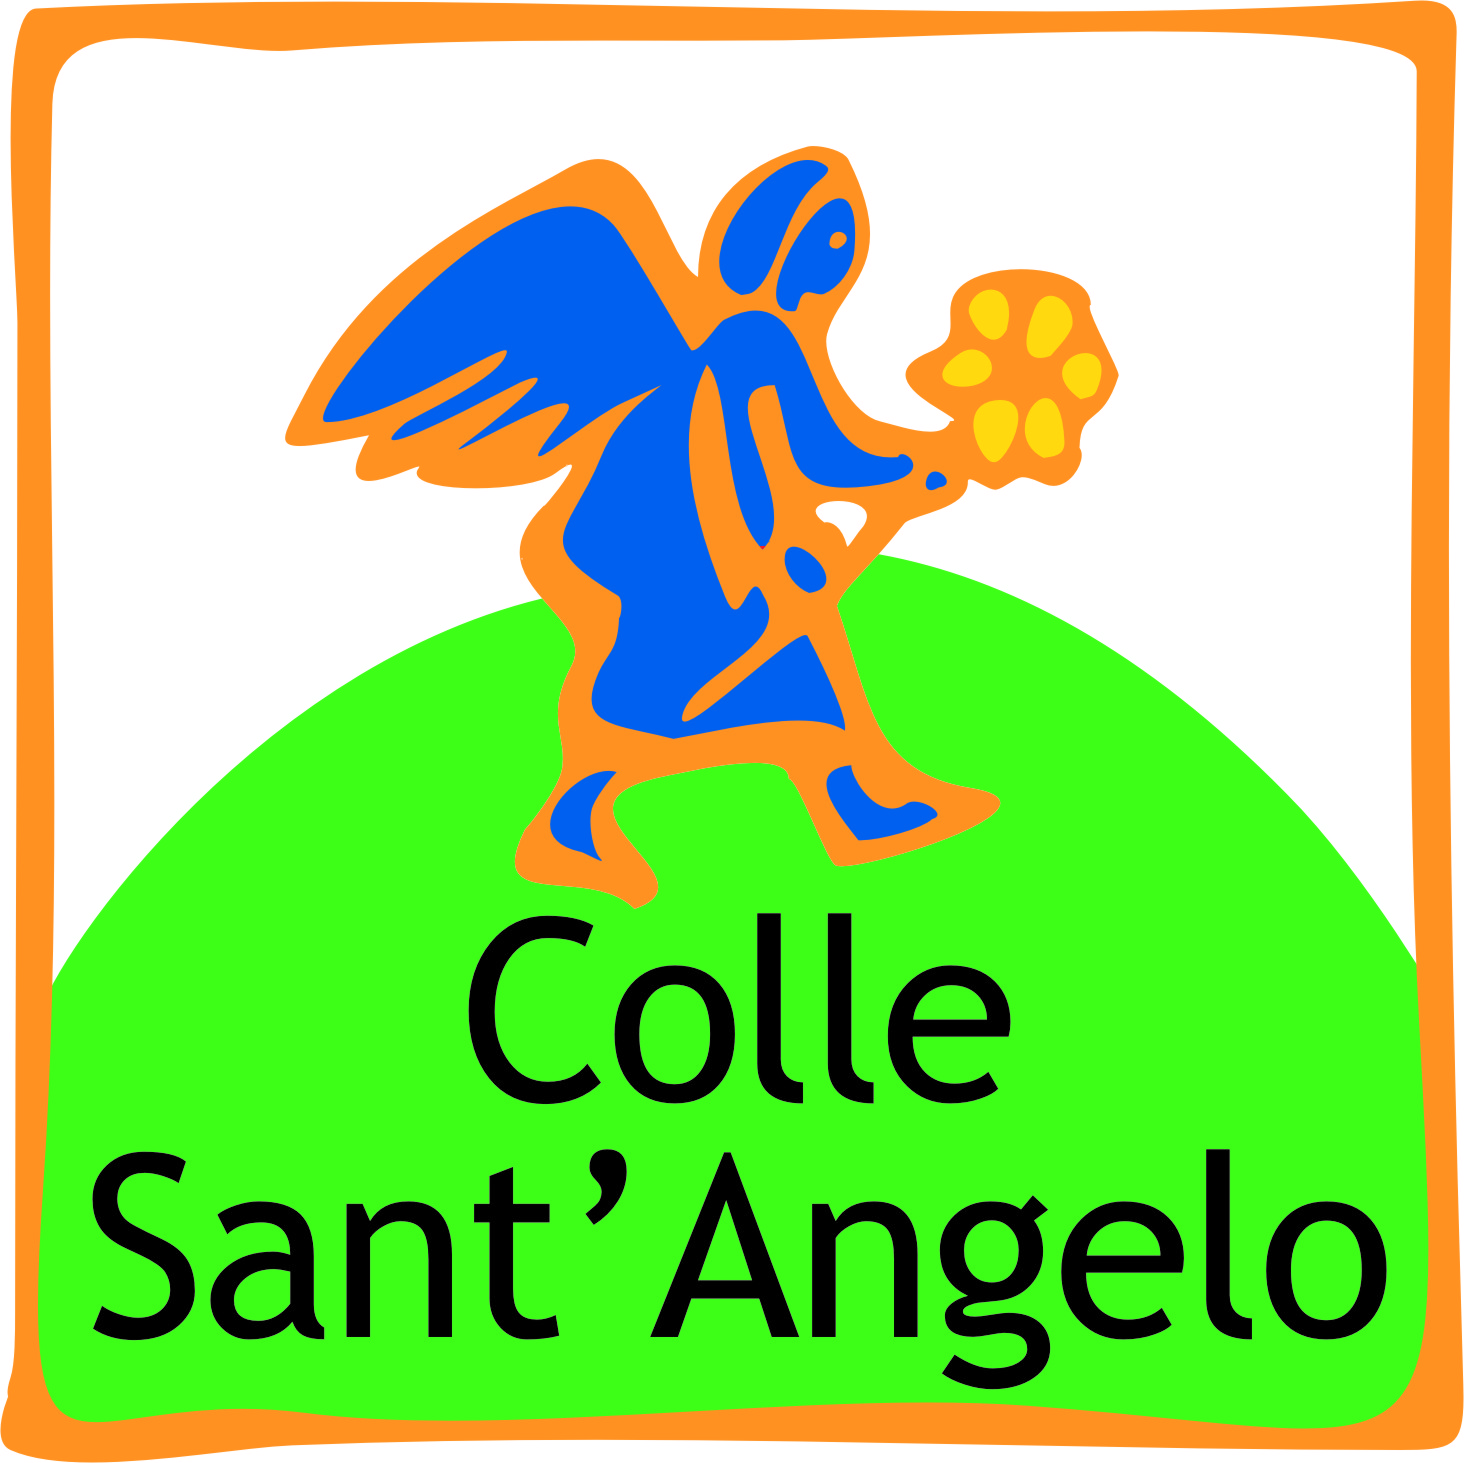 Colle Sant'angelo